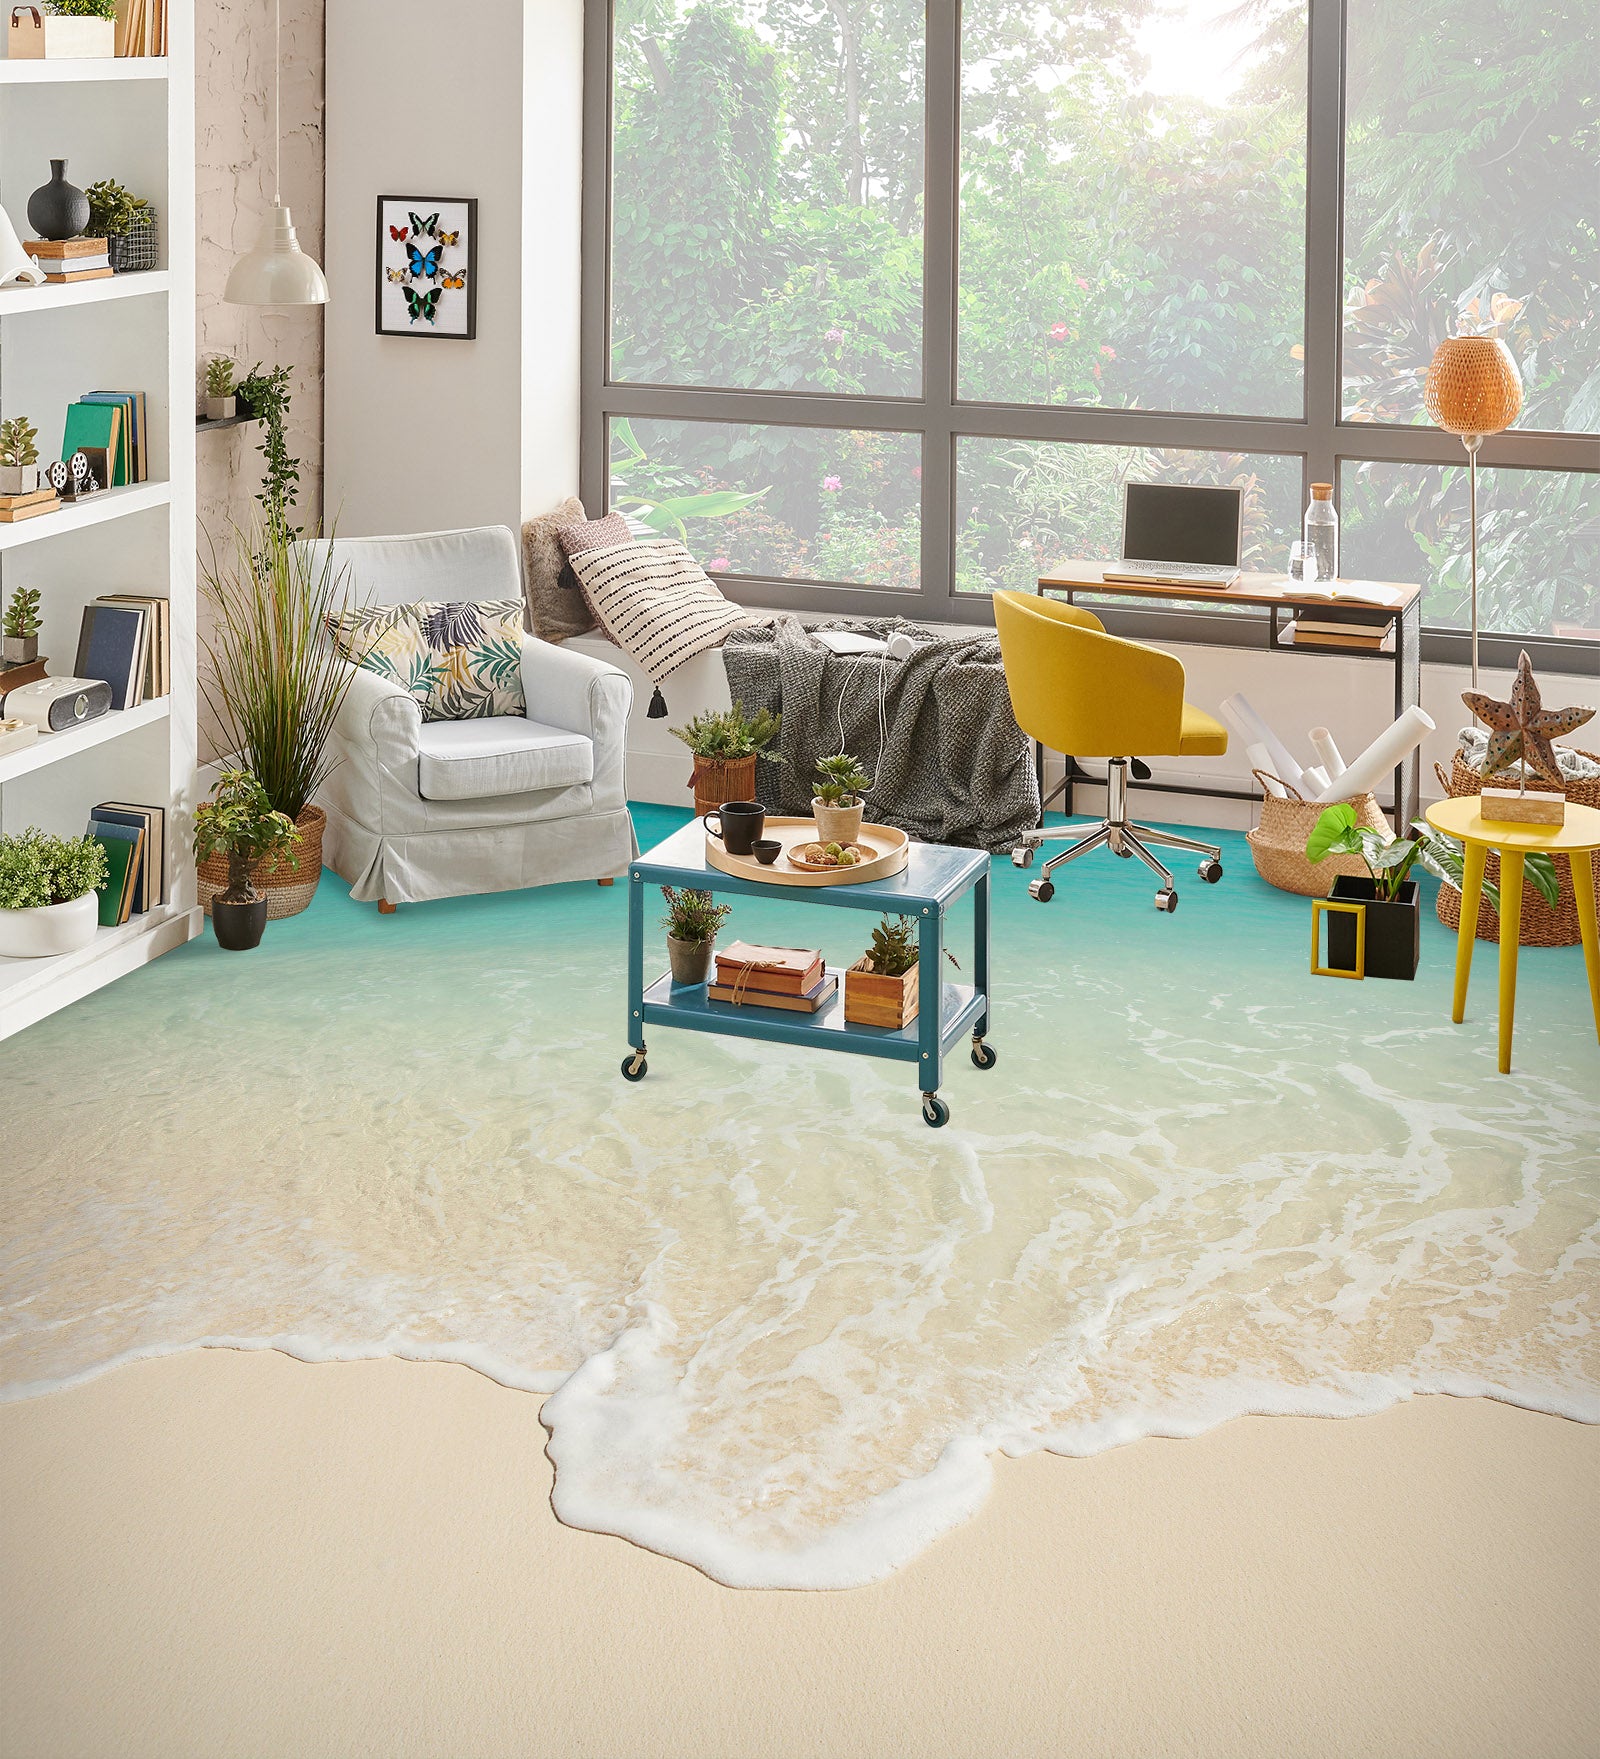 3D Touch The Sea 1518 Floor Mural  Wallpaper Murals Self-Adhesive Removable Print Epoxy